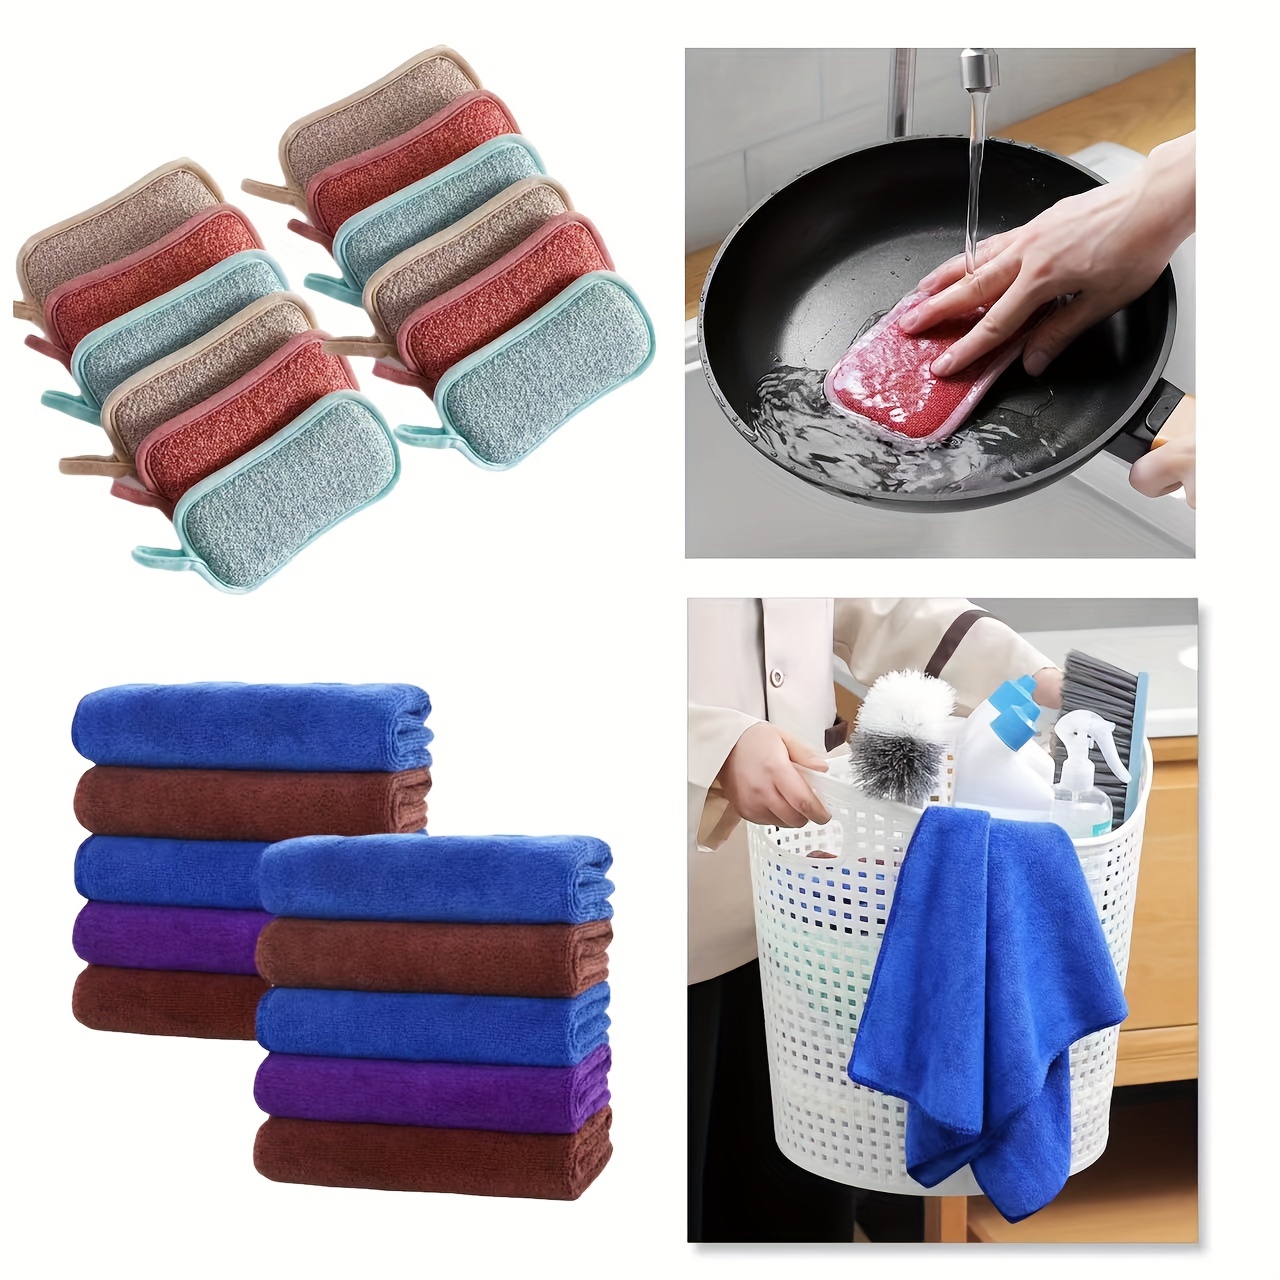  Towels Kitchen Sets Clearance